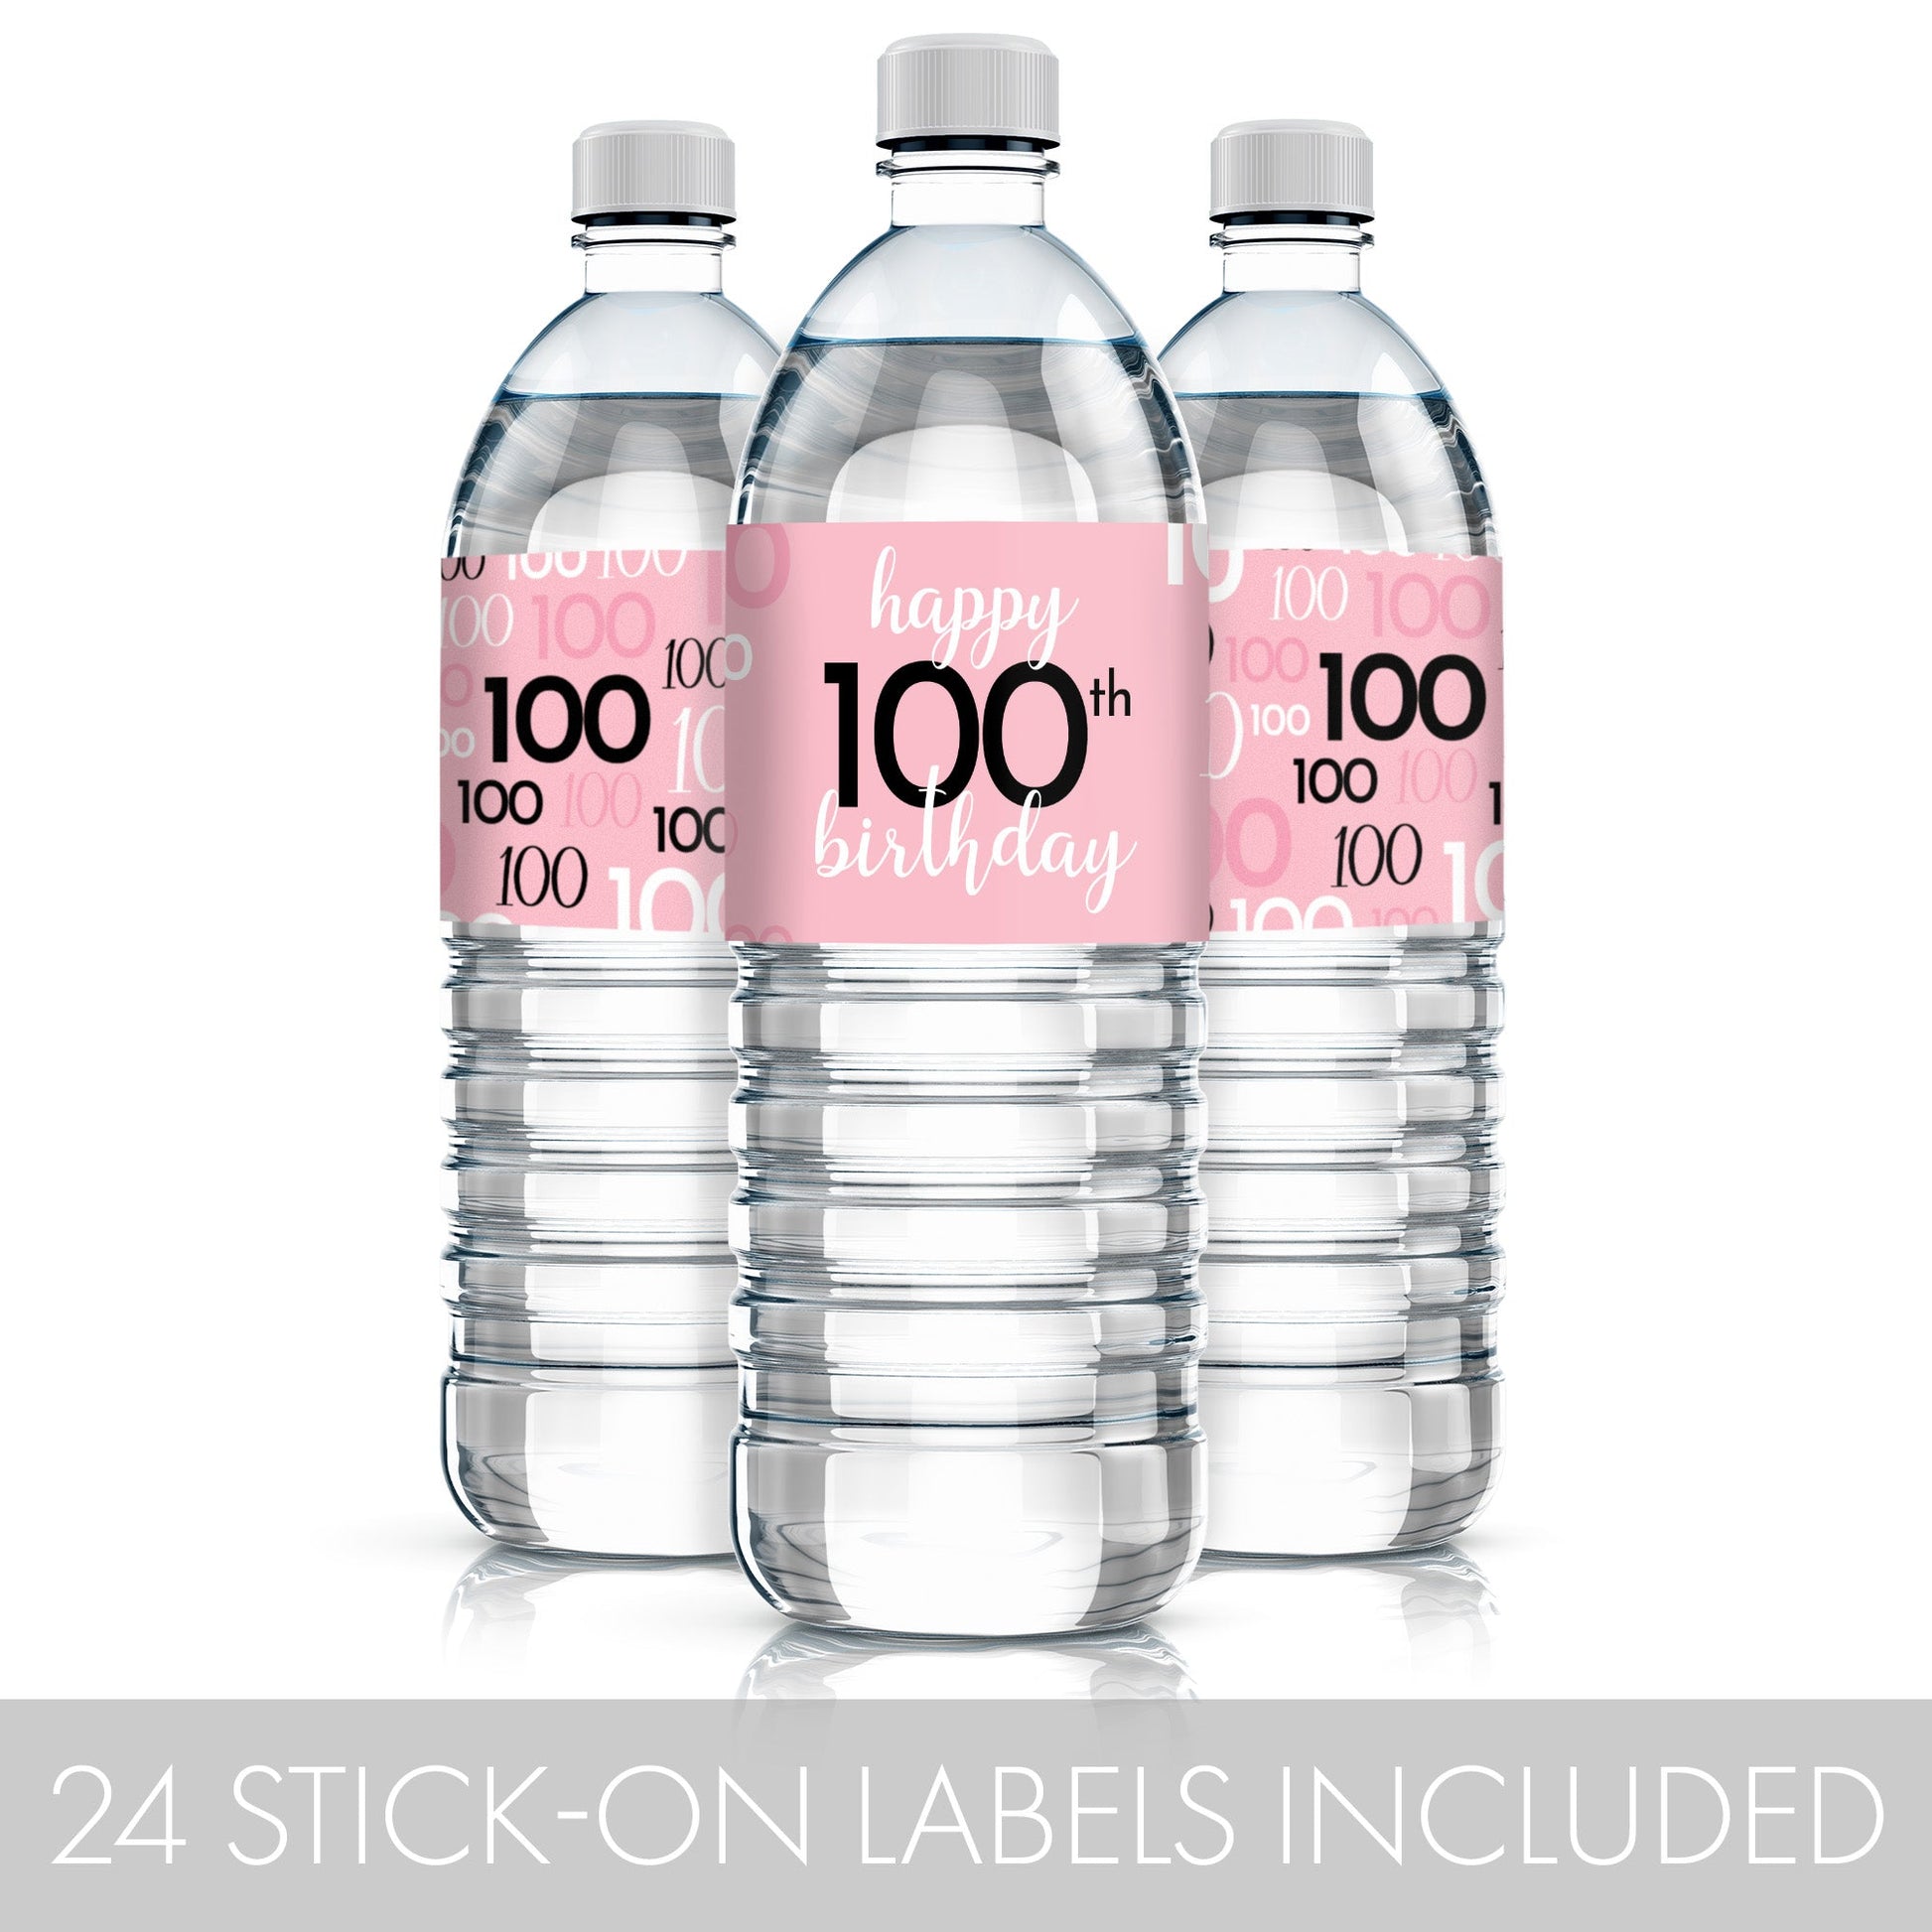 Eye-catching 100th birthday water bottle labels in pink and black with easy peel-and-stick application